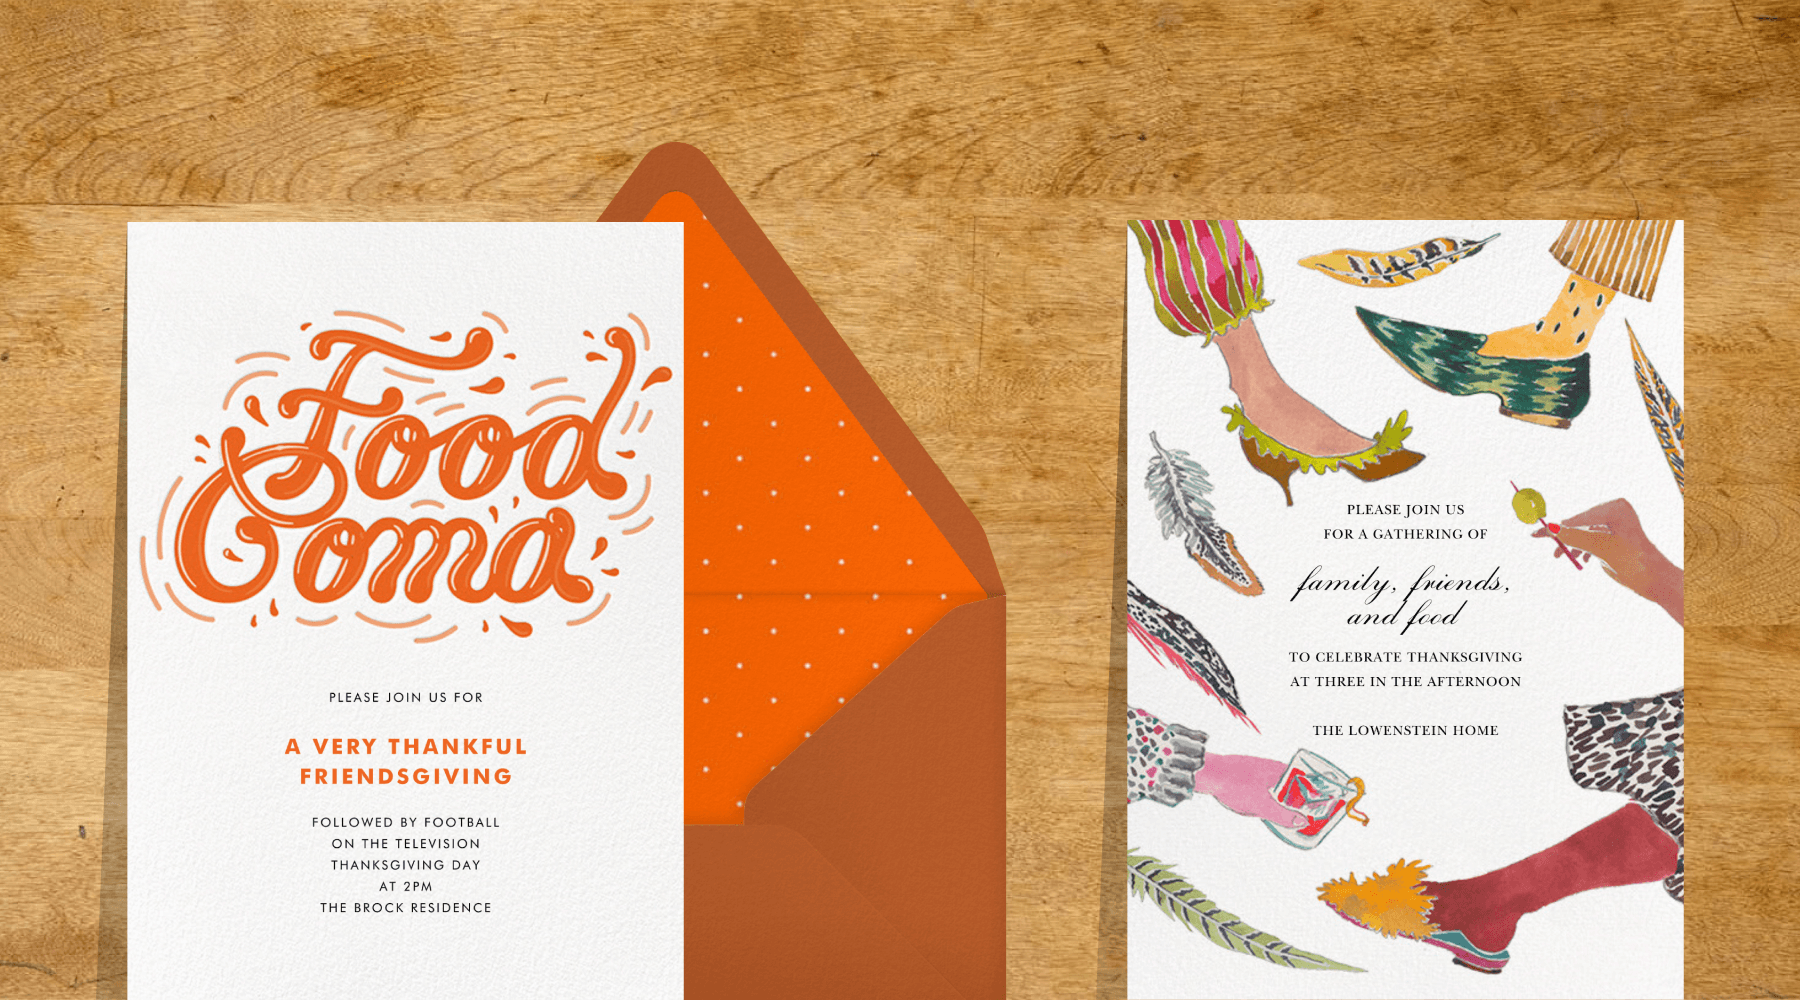 Two Thanksgiving invitations. Left says “Food coma” in orange bubble letters. Right says “family friends and food” in script with illustrations of colorful feet in shoes, hands holding drinks, and feathers around the border.